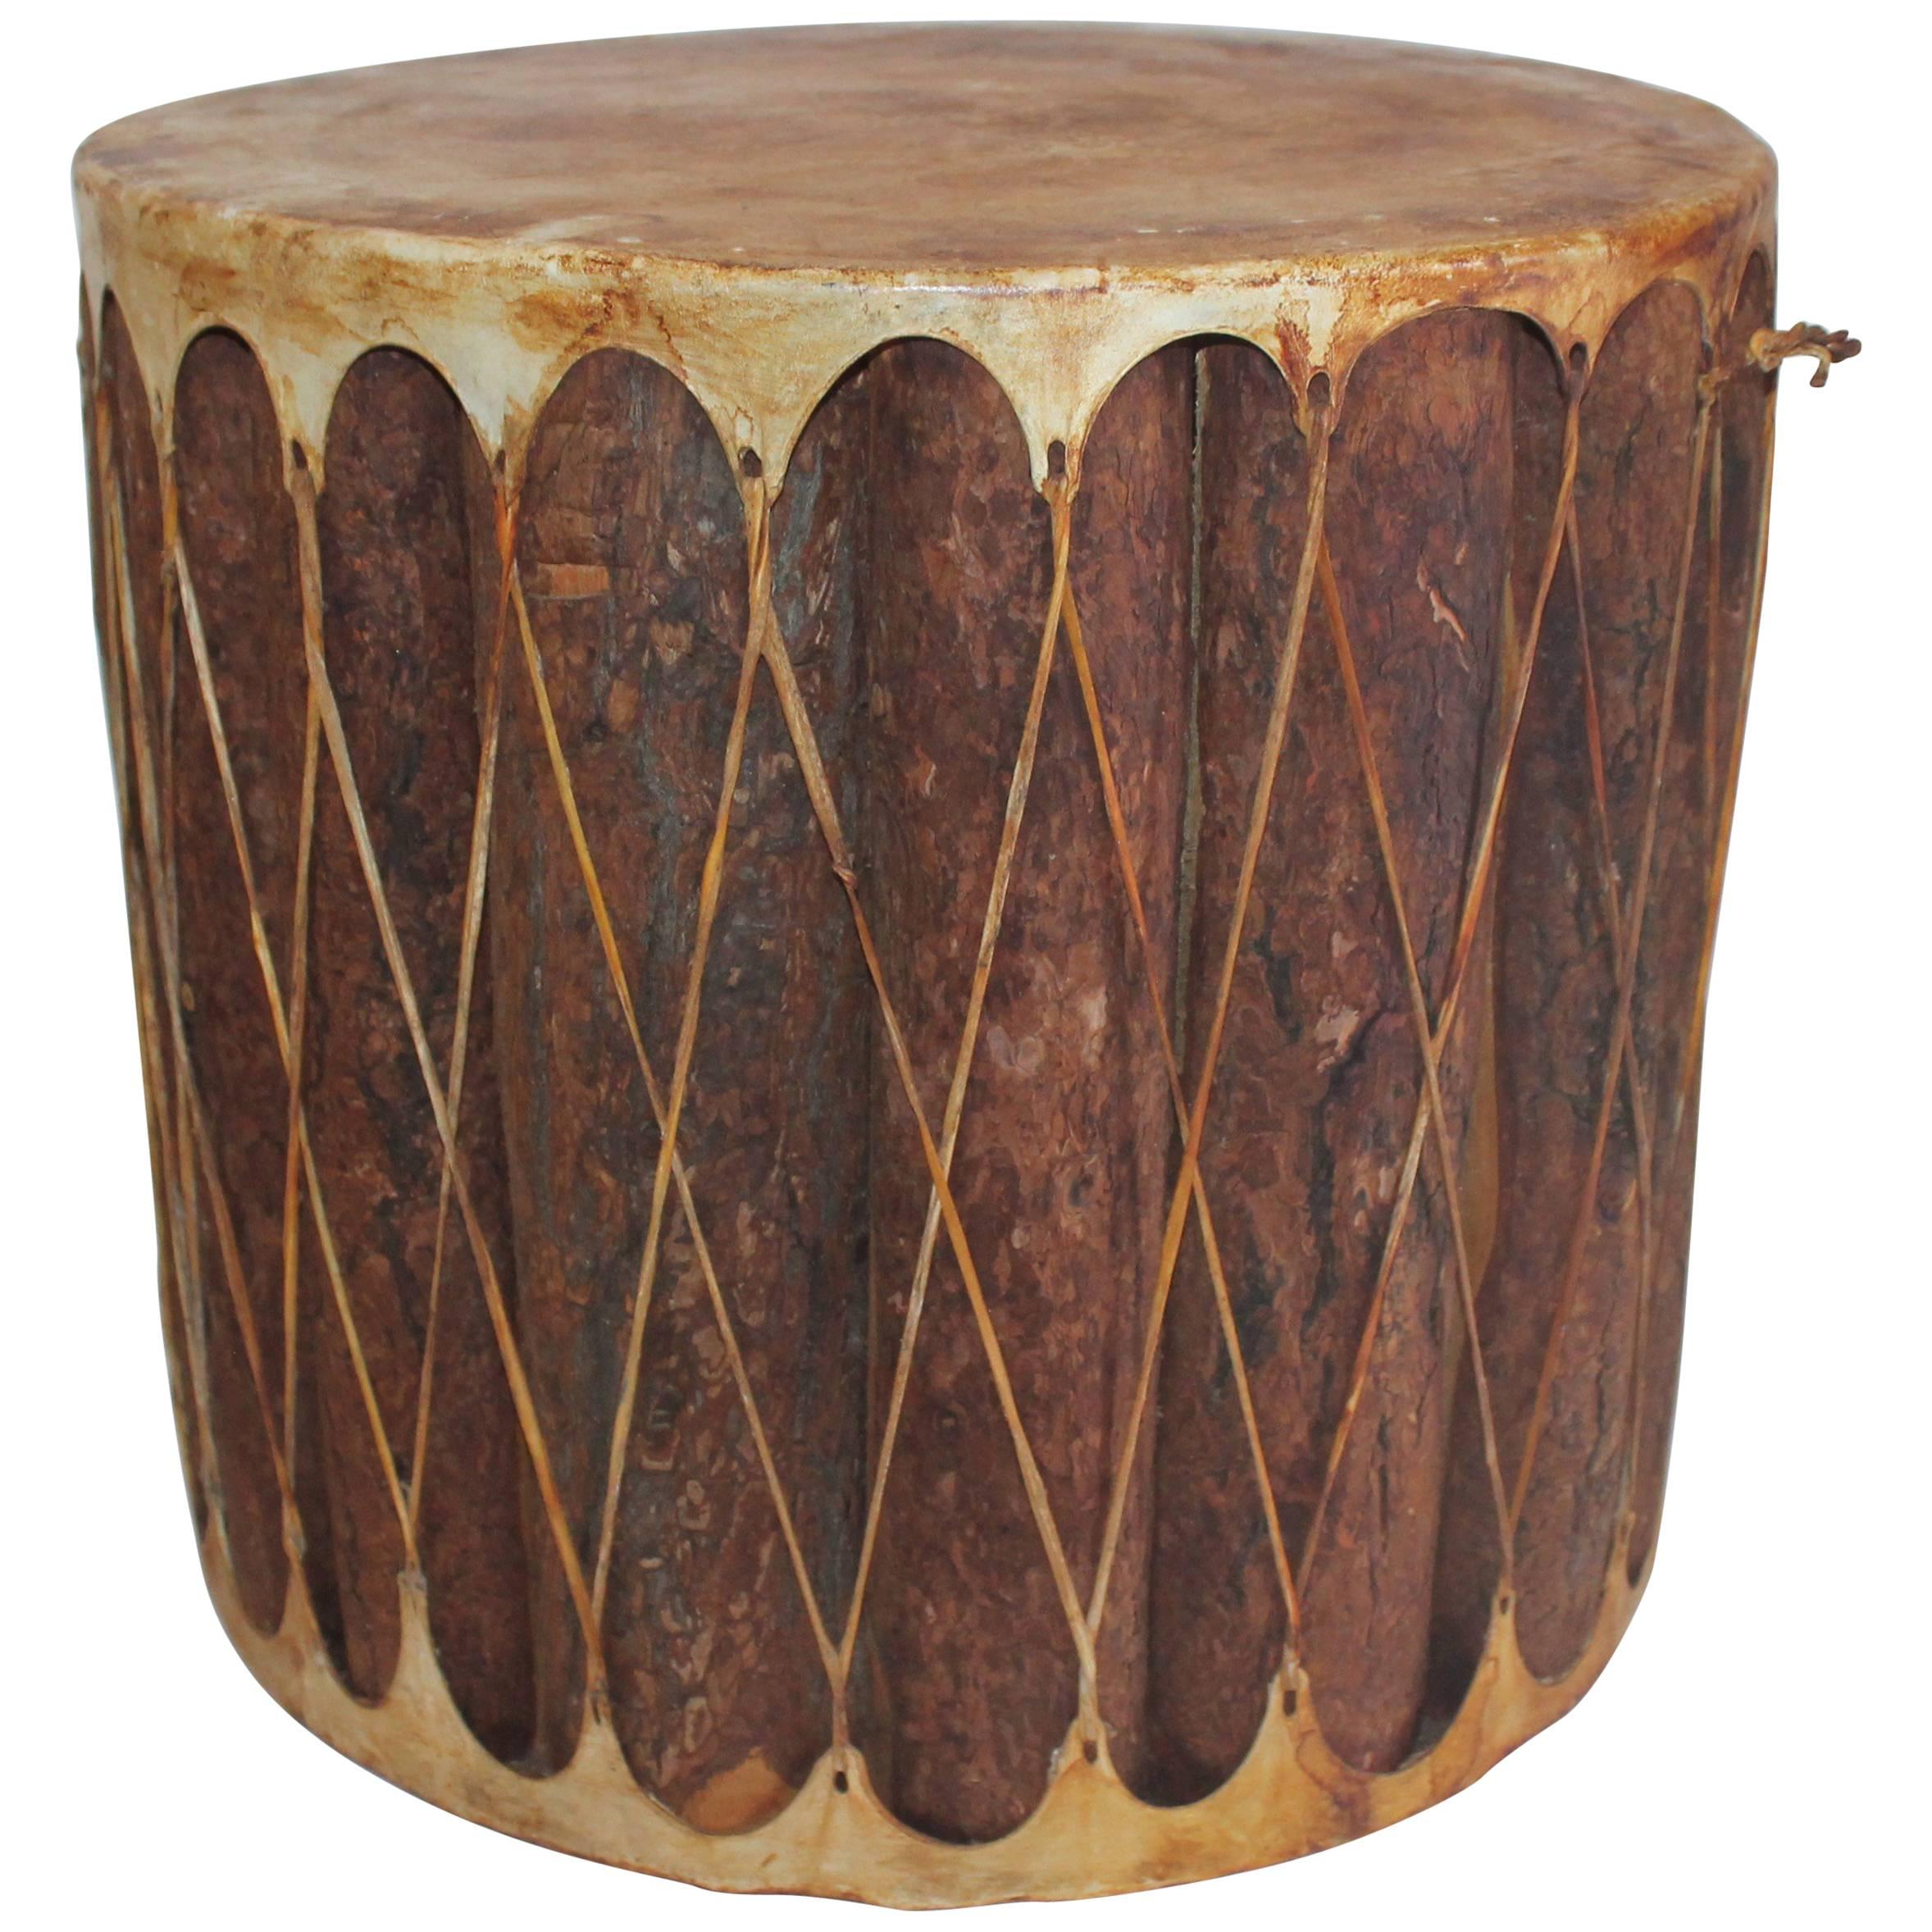 Indian Drum / Side Table